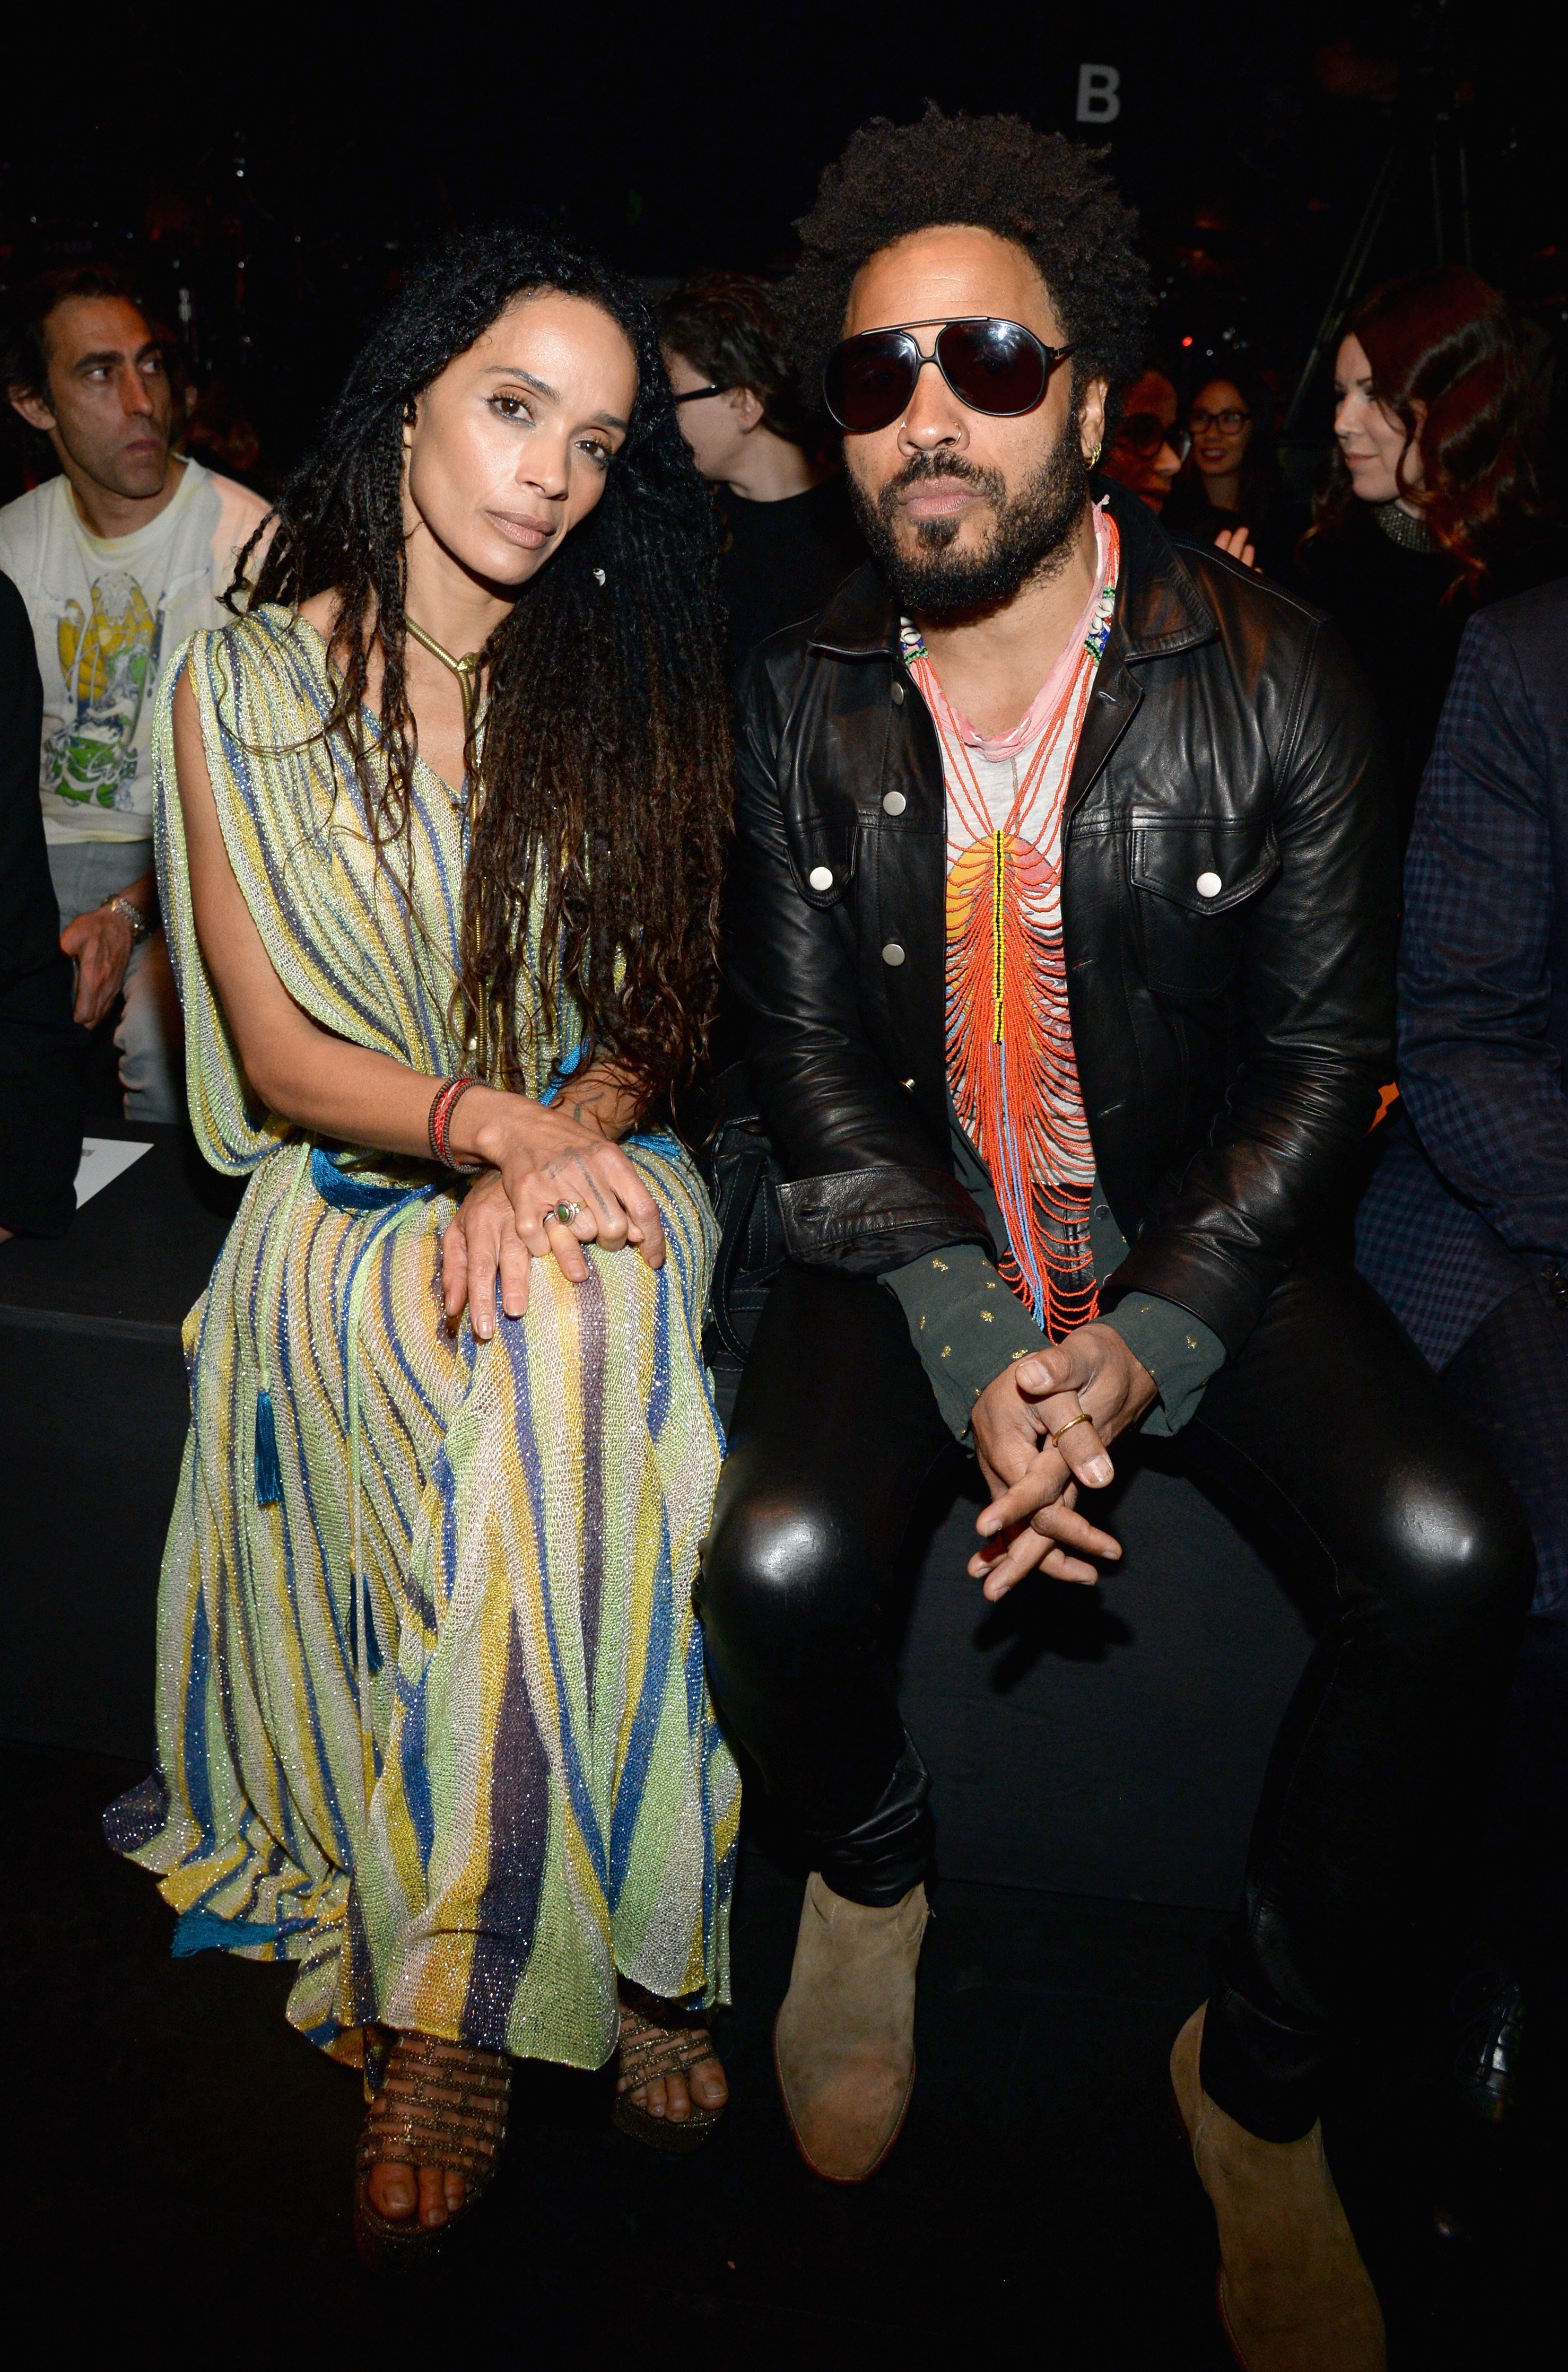 Lisa Bonet and Lenny Kravitz attend Saint Laurent at the Palladium on February 10, 2016 in Los Angeles, California. | Source: Getty Images